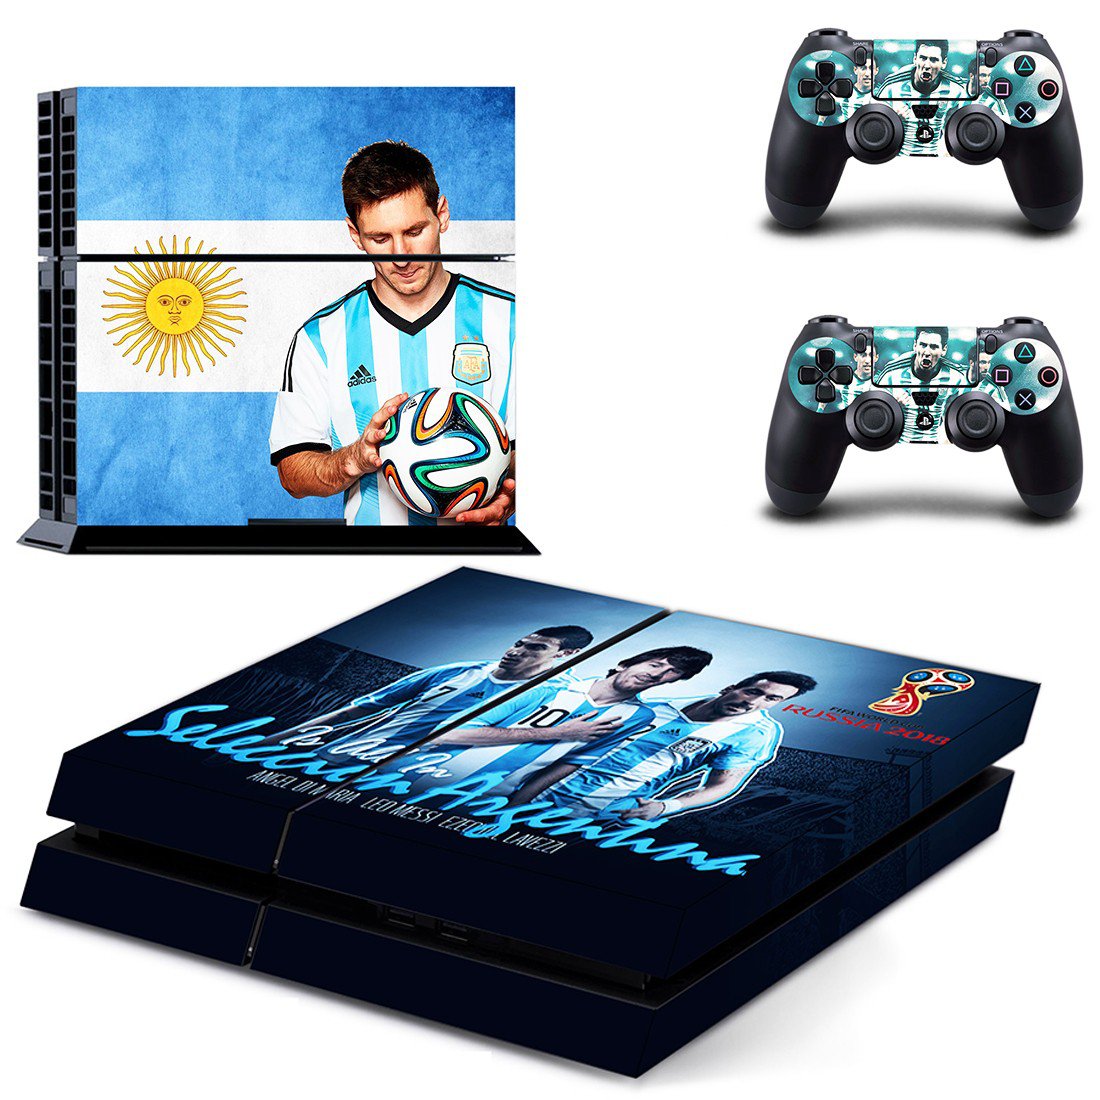 2018 FIFA World Cup Messi Cover For PlayStation 4